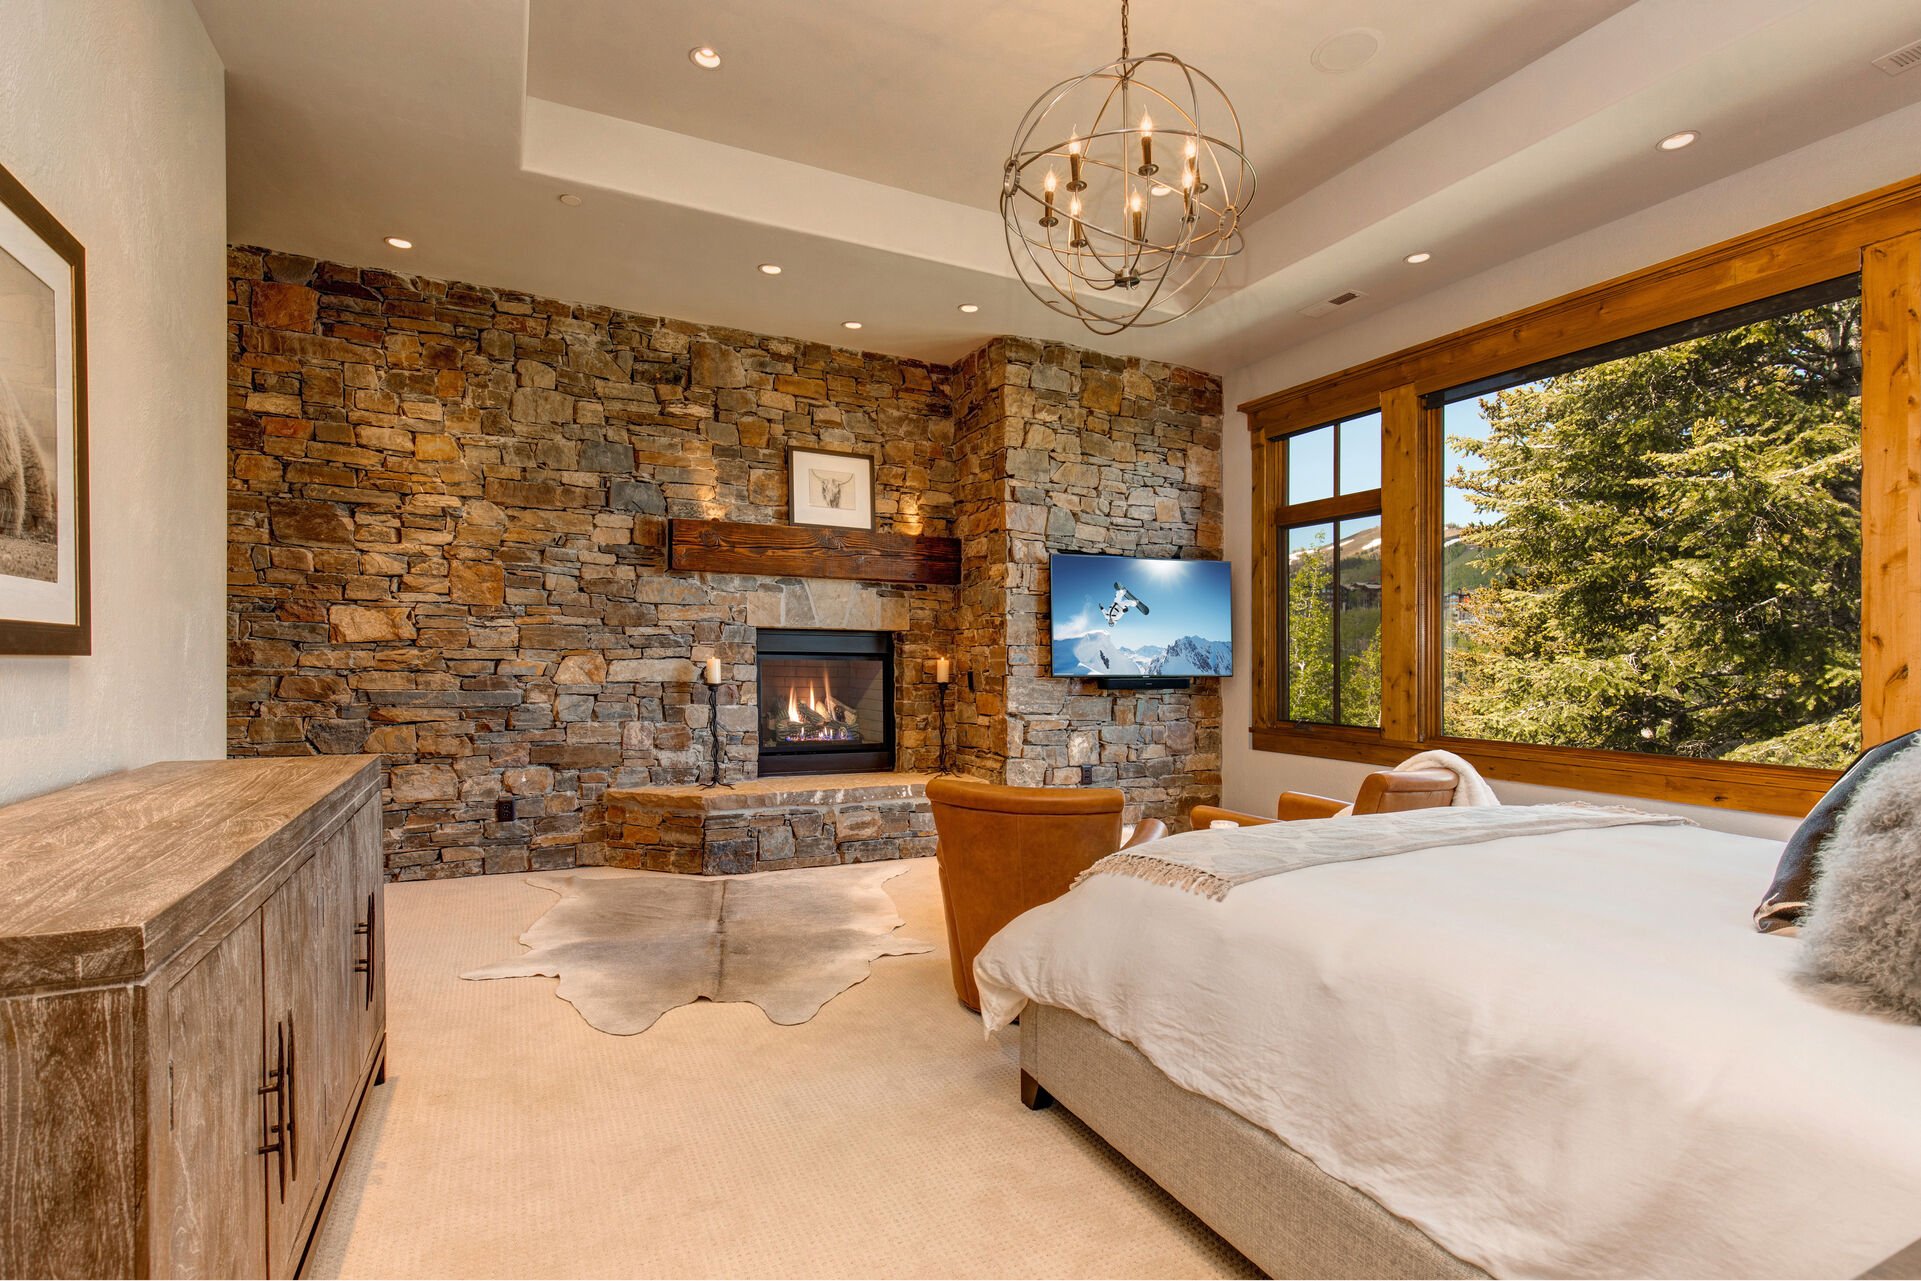 Master Bedroom with Fireplace, SmartTV, Seating Area